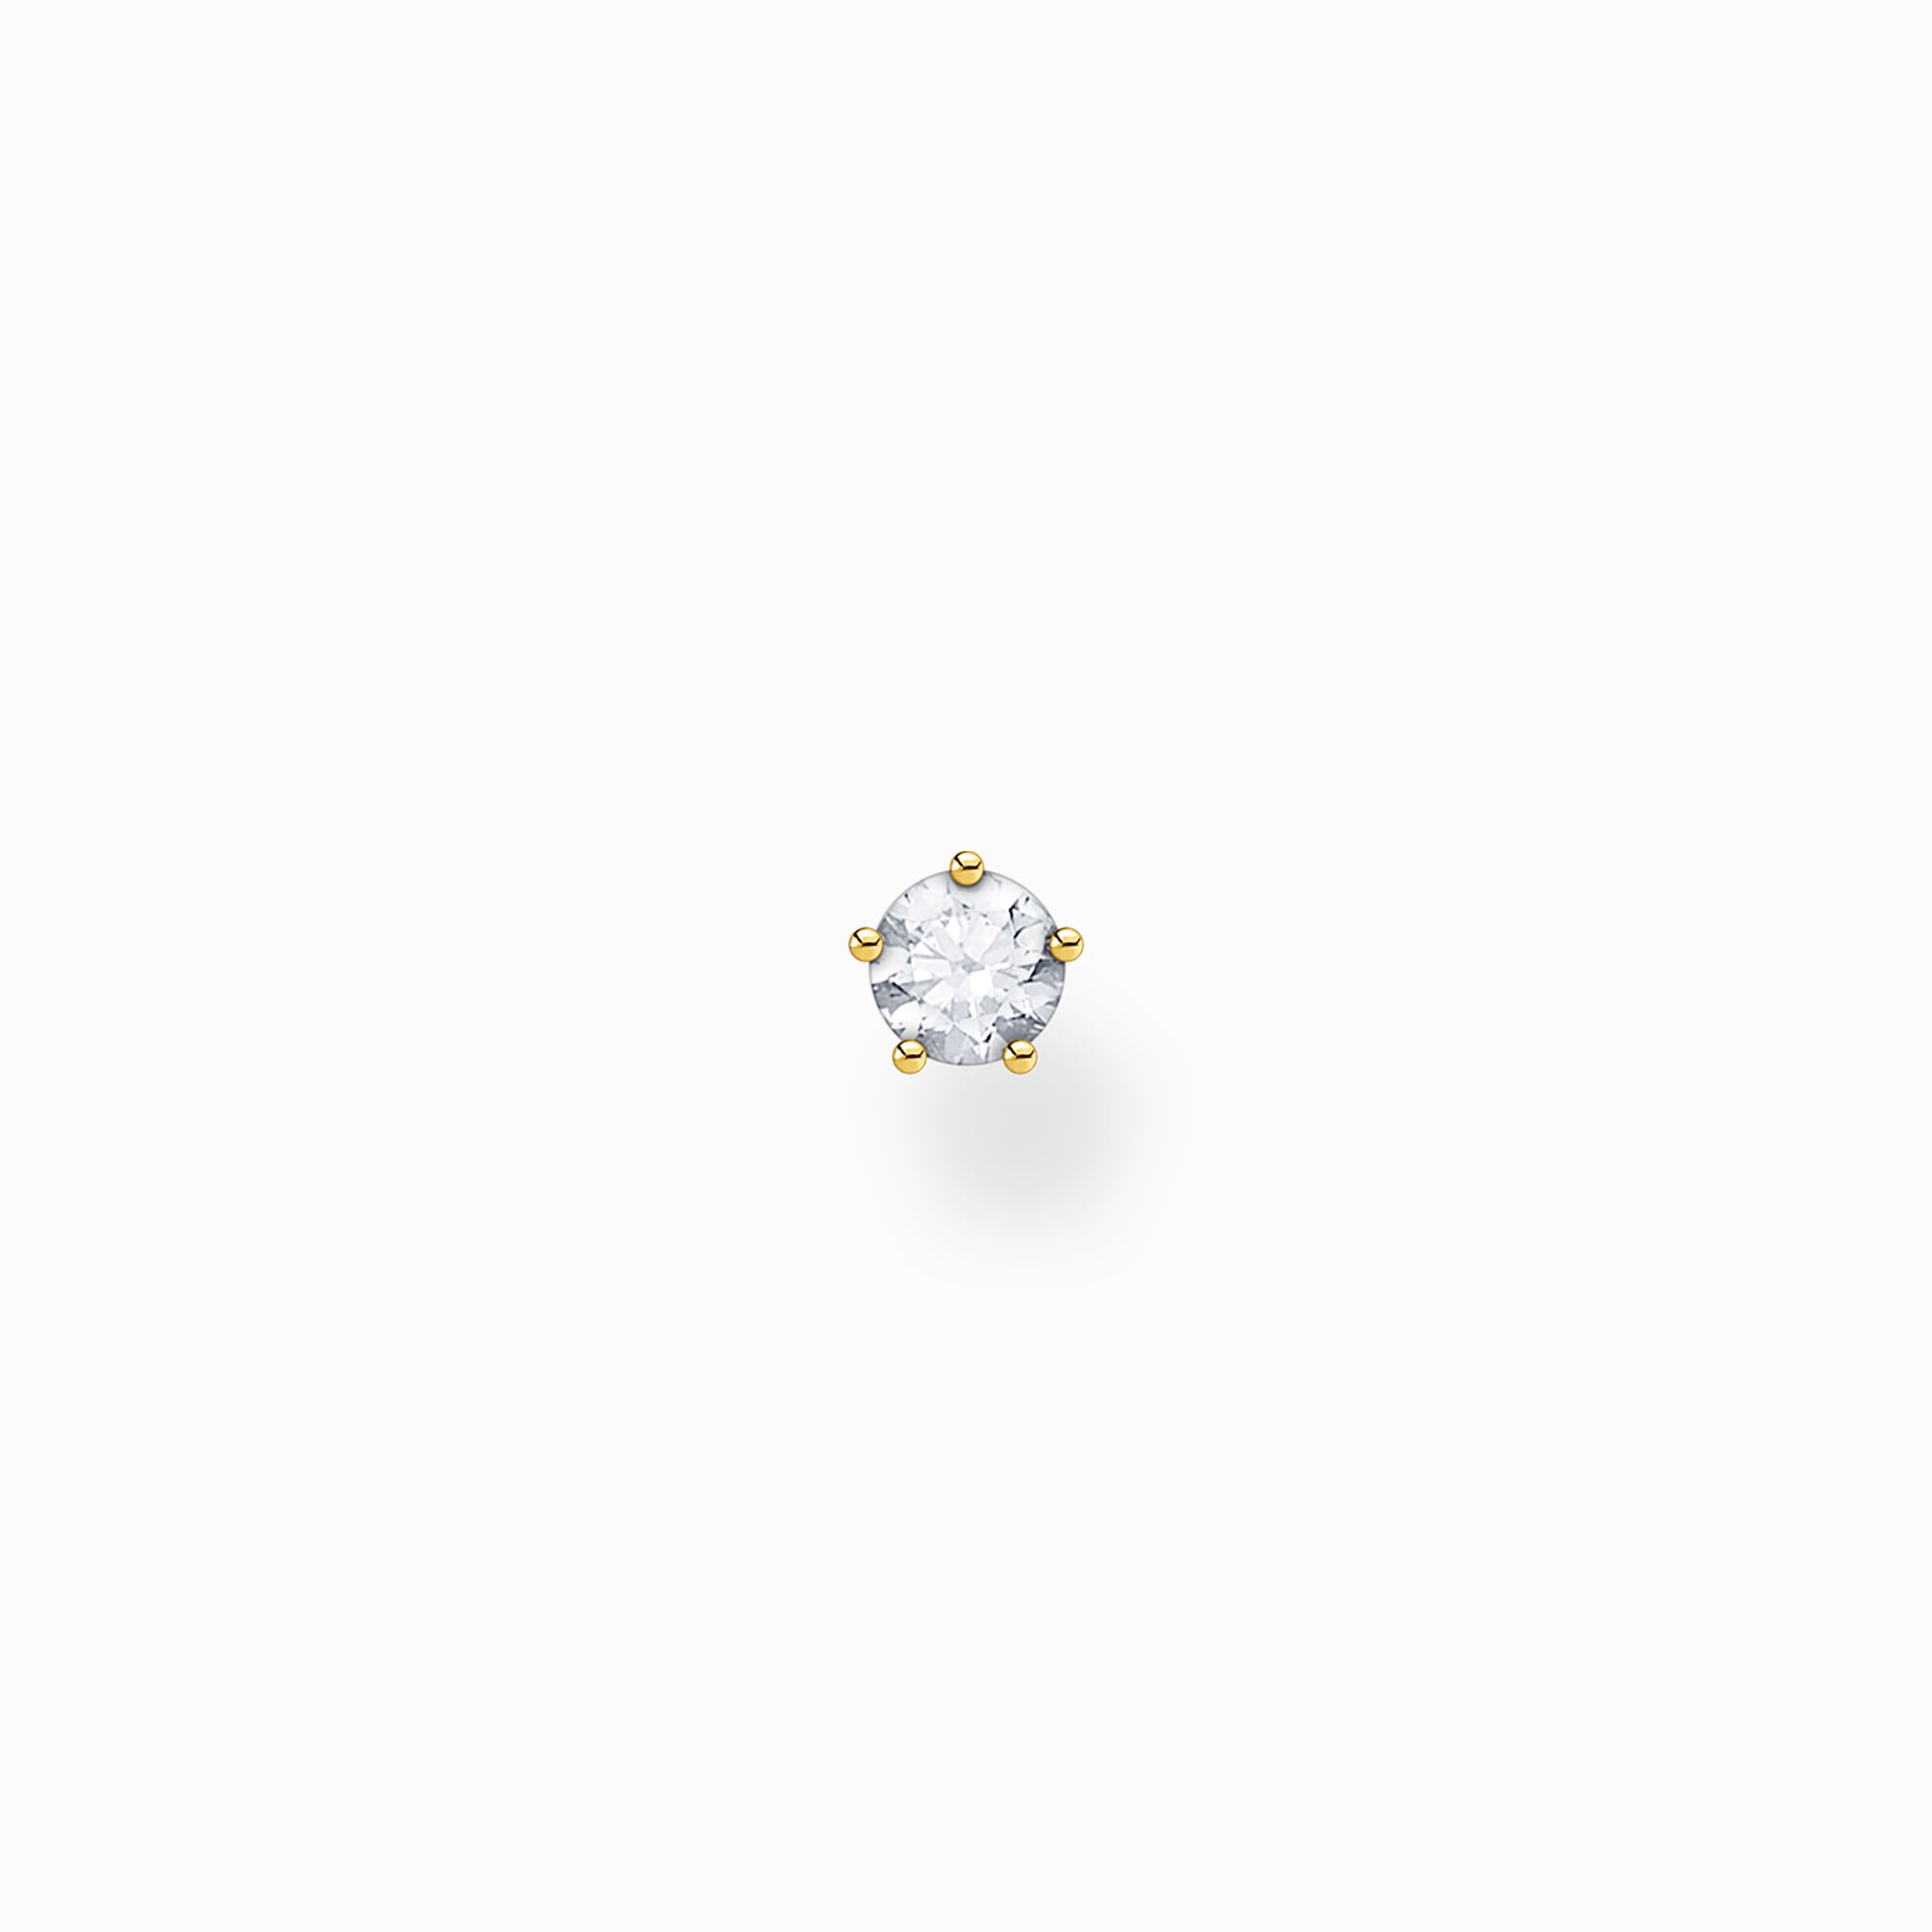 Single ear stud white stone gold from the Charming Collection collection in the THOMAS SABO online store